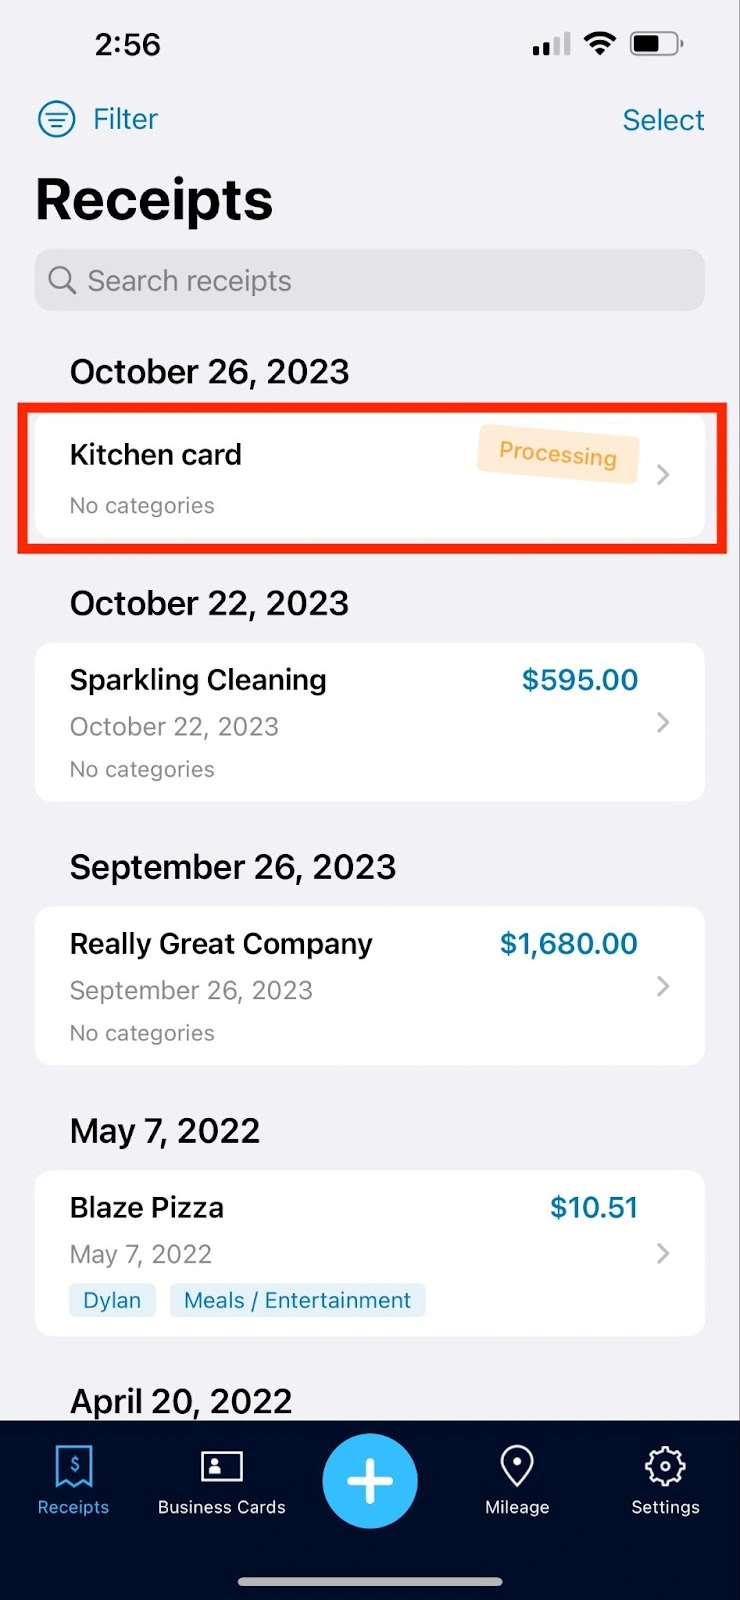 Pending documents will be listed at the top of your receipts feed as 